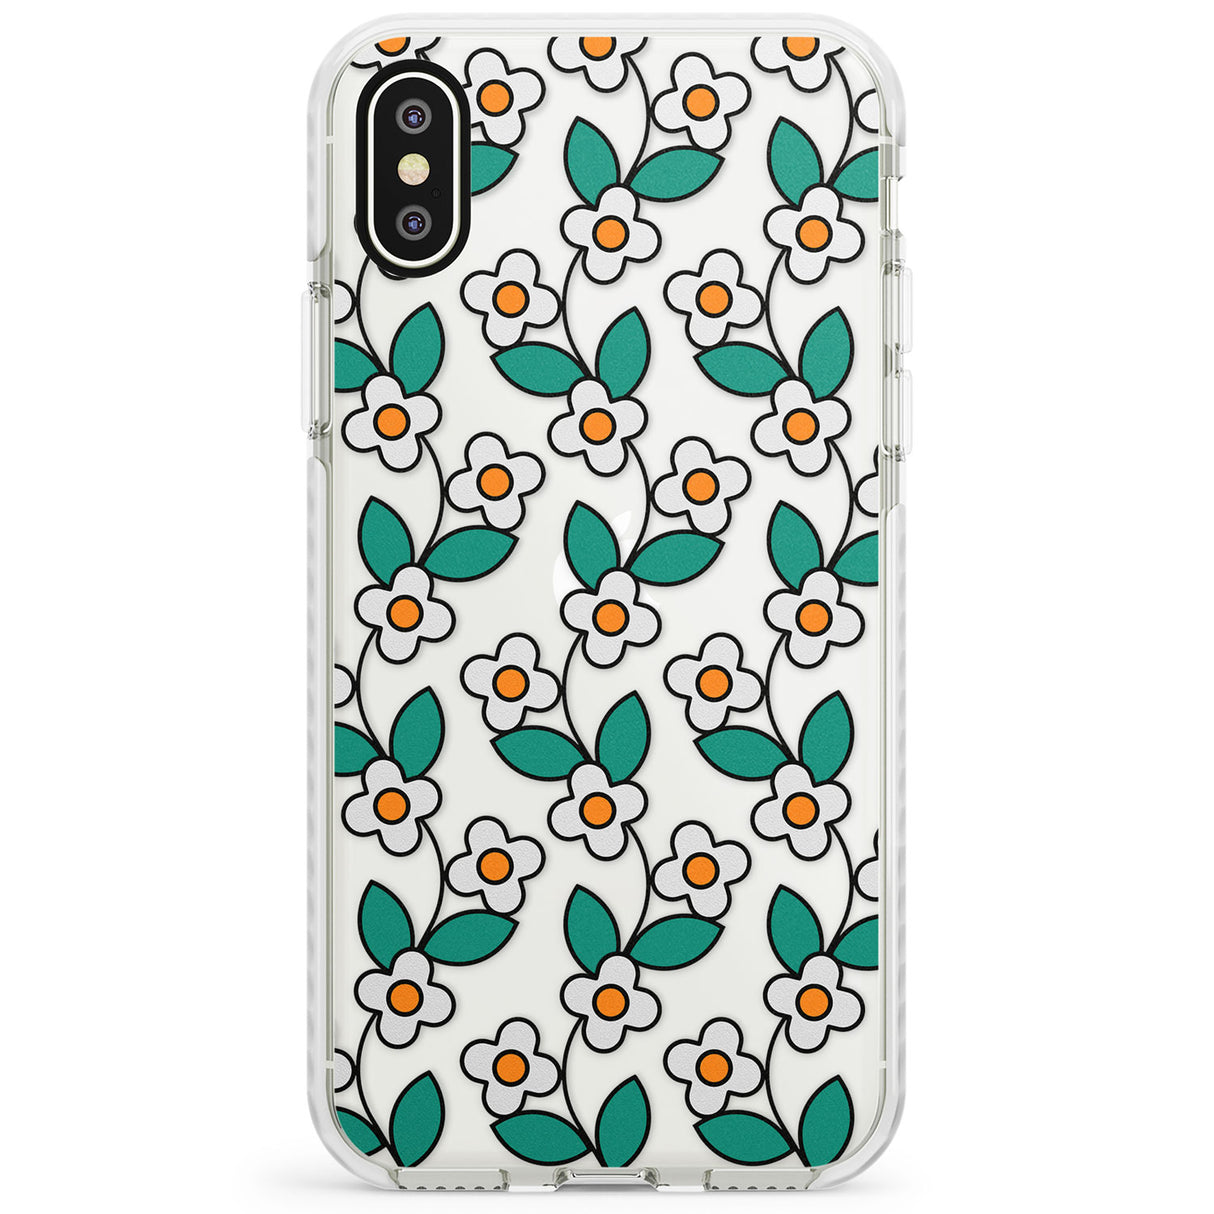 Spring Daisies Impact Phone Case for iPhone X XS Max XR